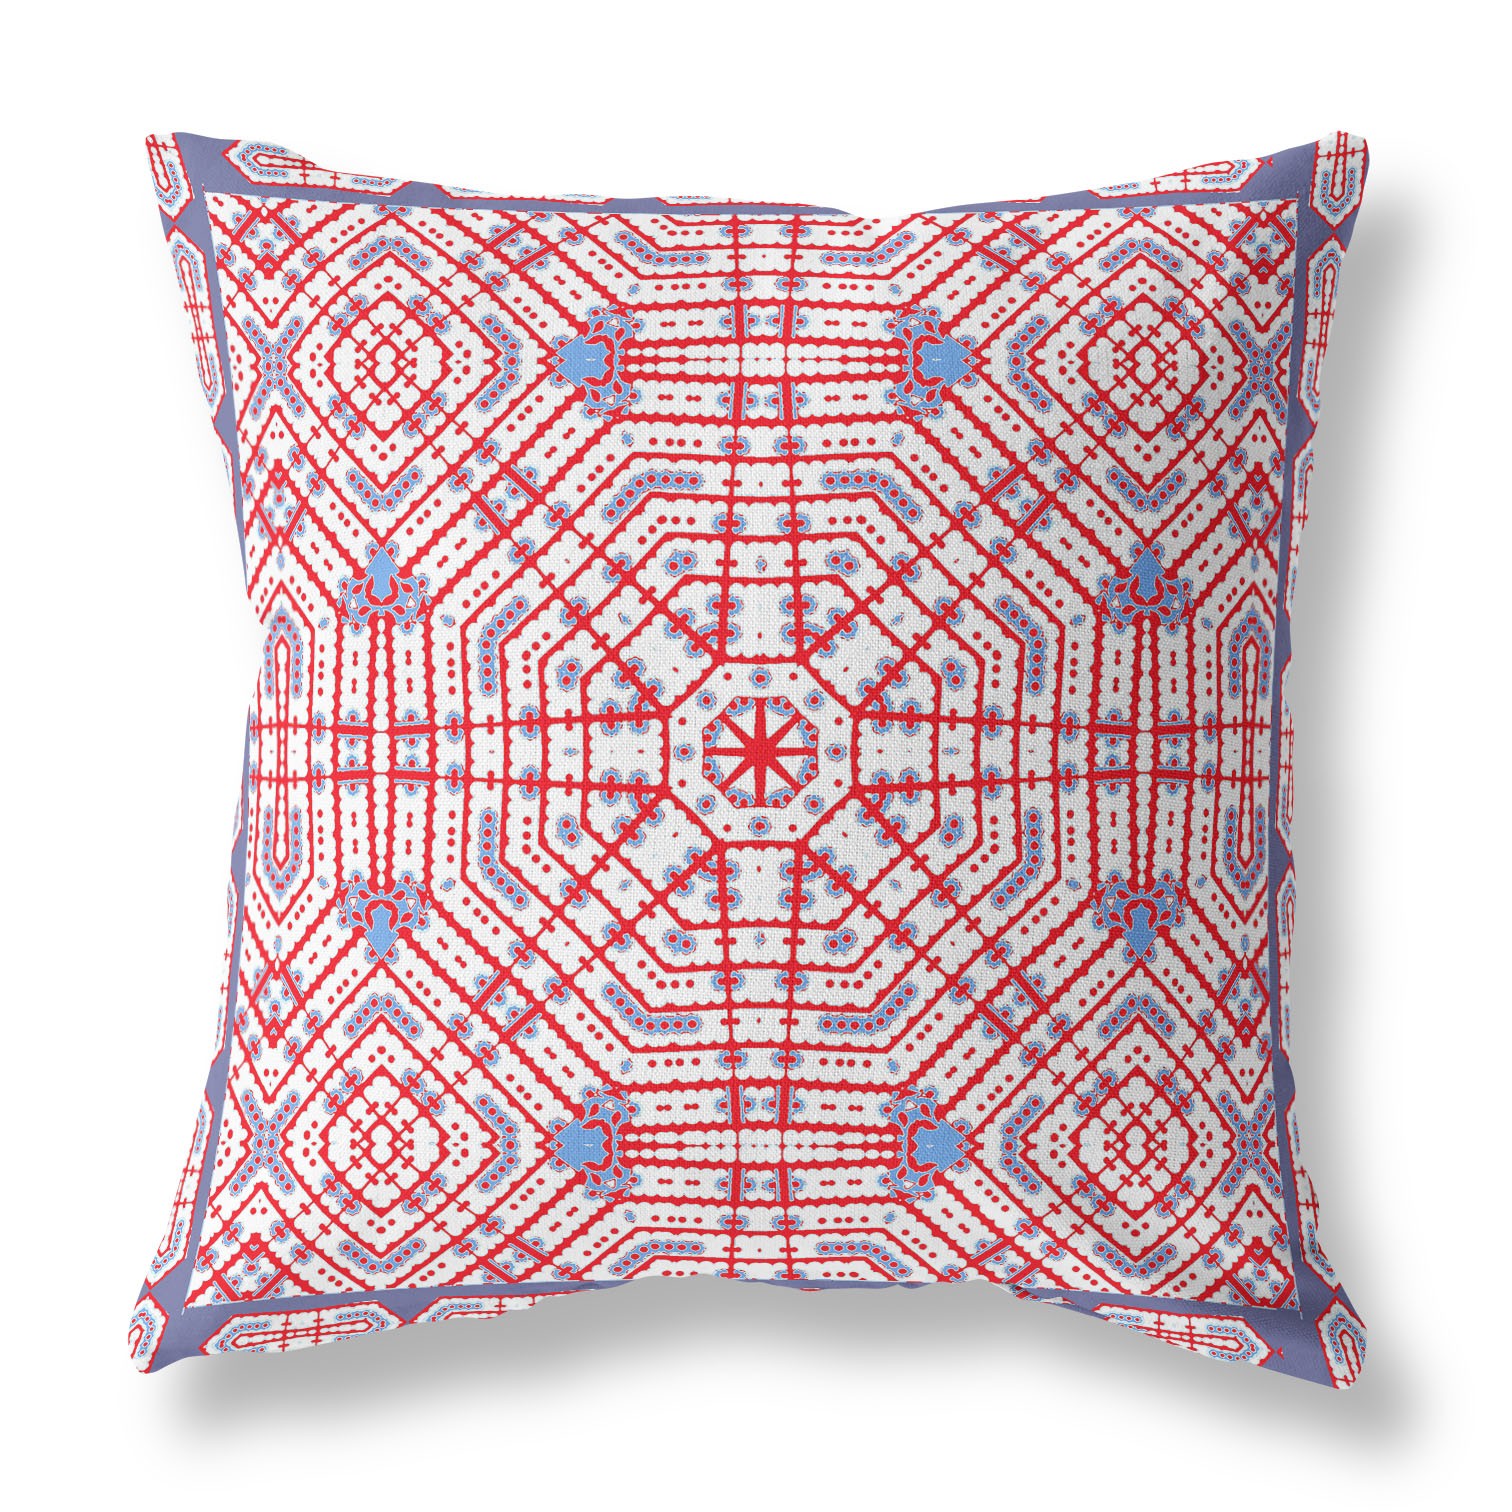 26” Red White Geostar Indoor Outdoor Throw Pillow-415010-1